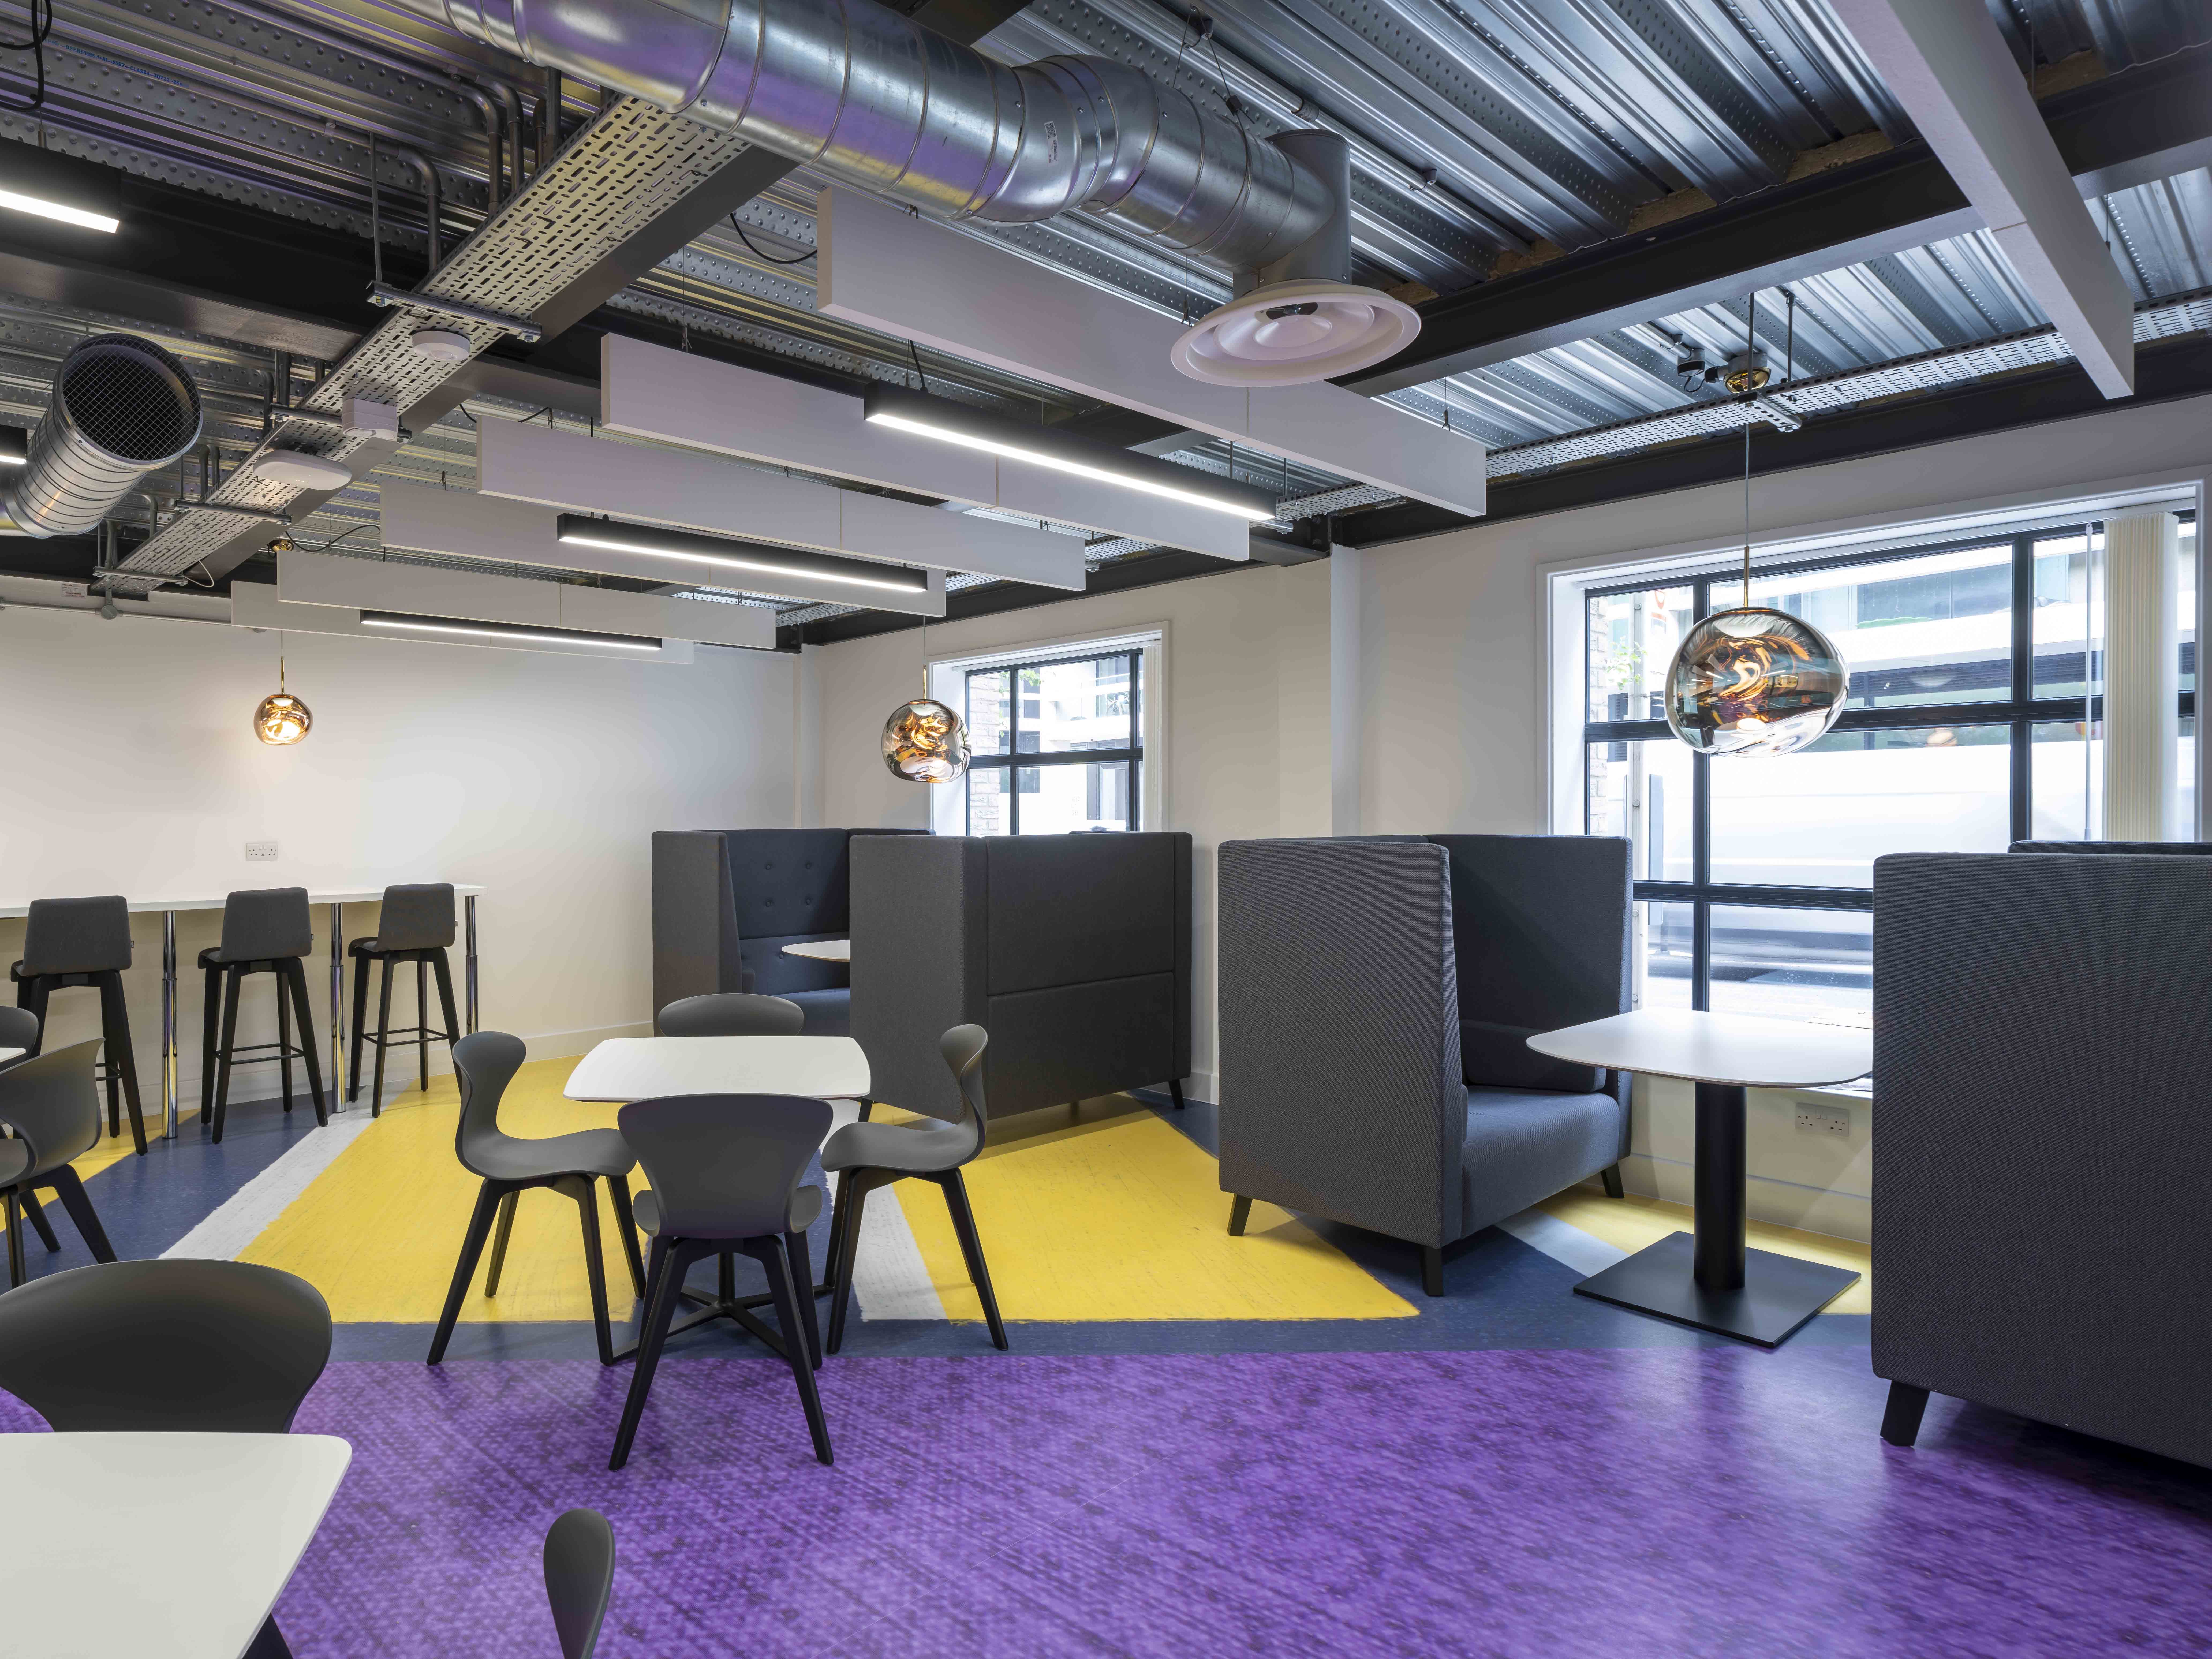 A purple and yellow designsphere floor in a seating area